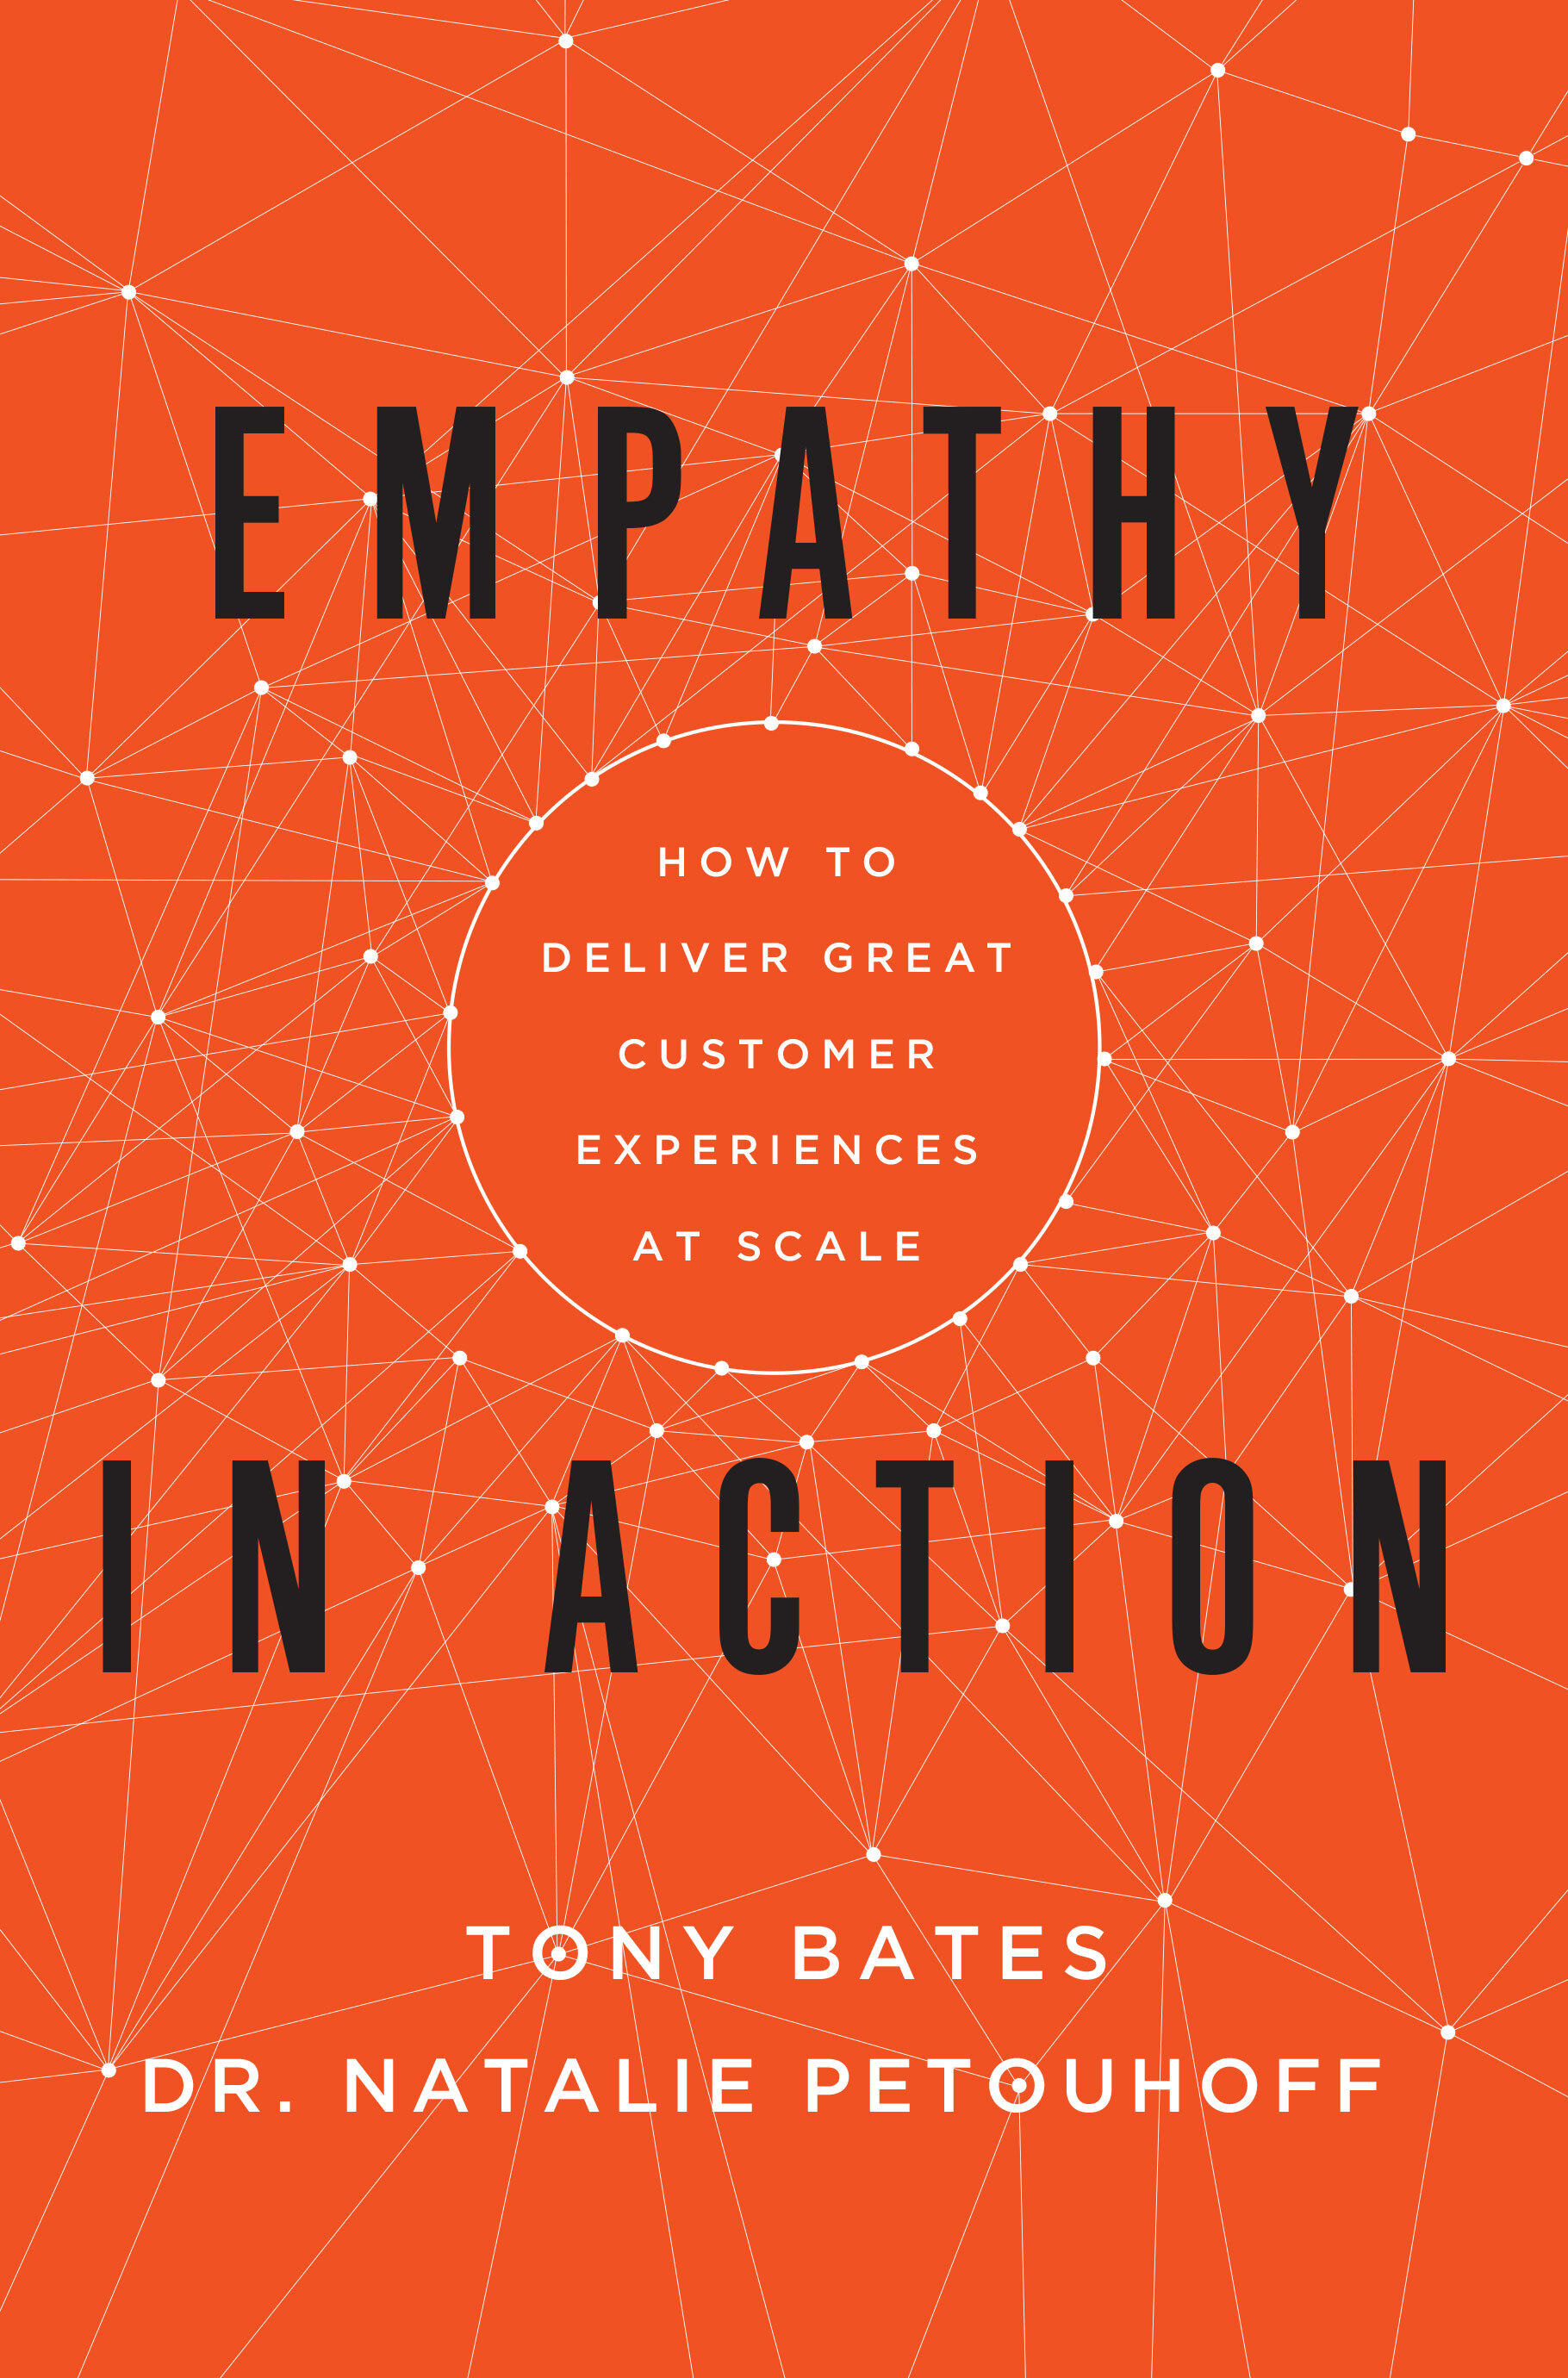 Empathy in Action: How to Deliver Great Customer Experiences at Scale